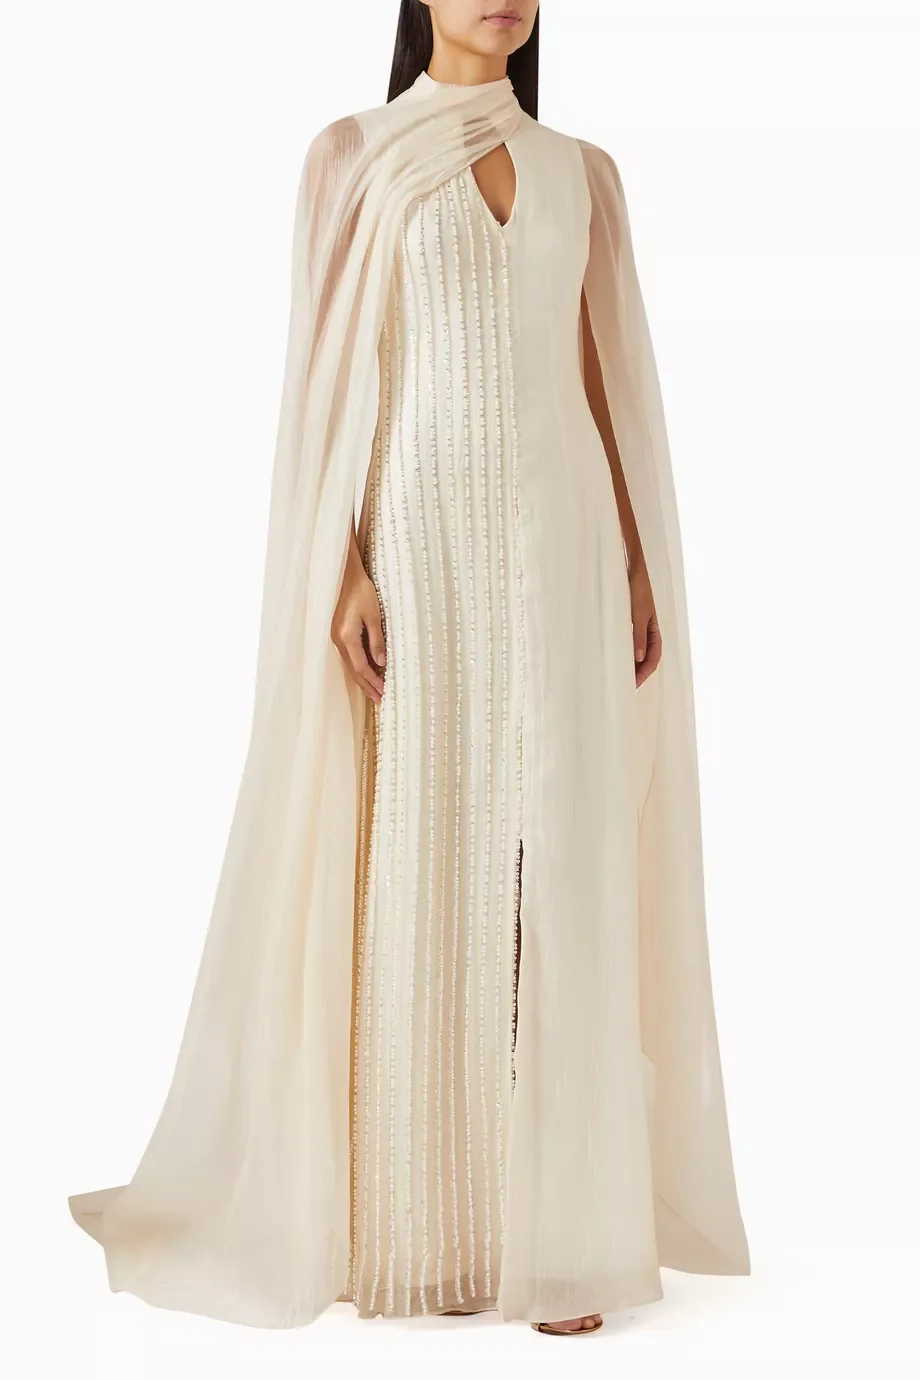 Elegant special occasions dress Crafted from airy chiffon the silhouette shimmers vertical lines embellishments evening dress  ﻿